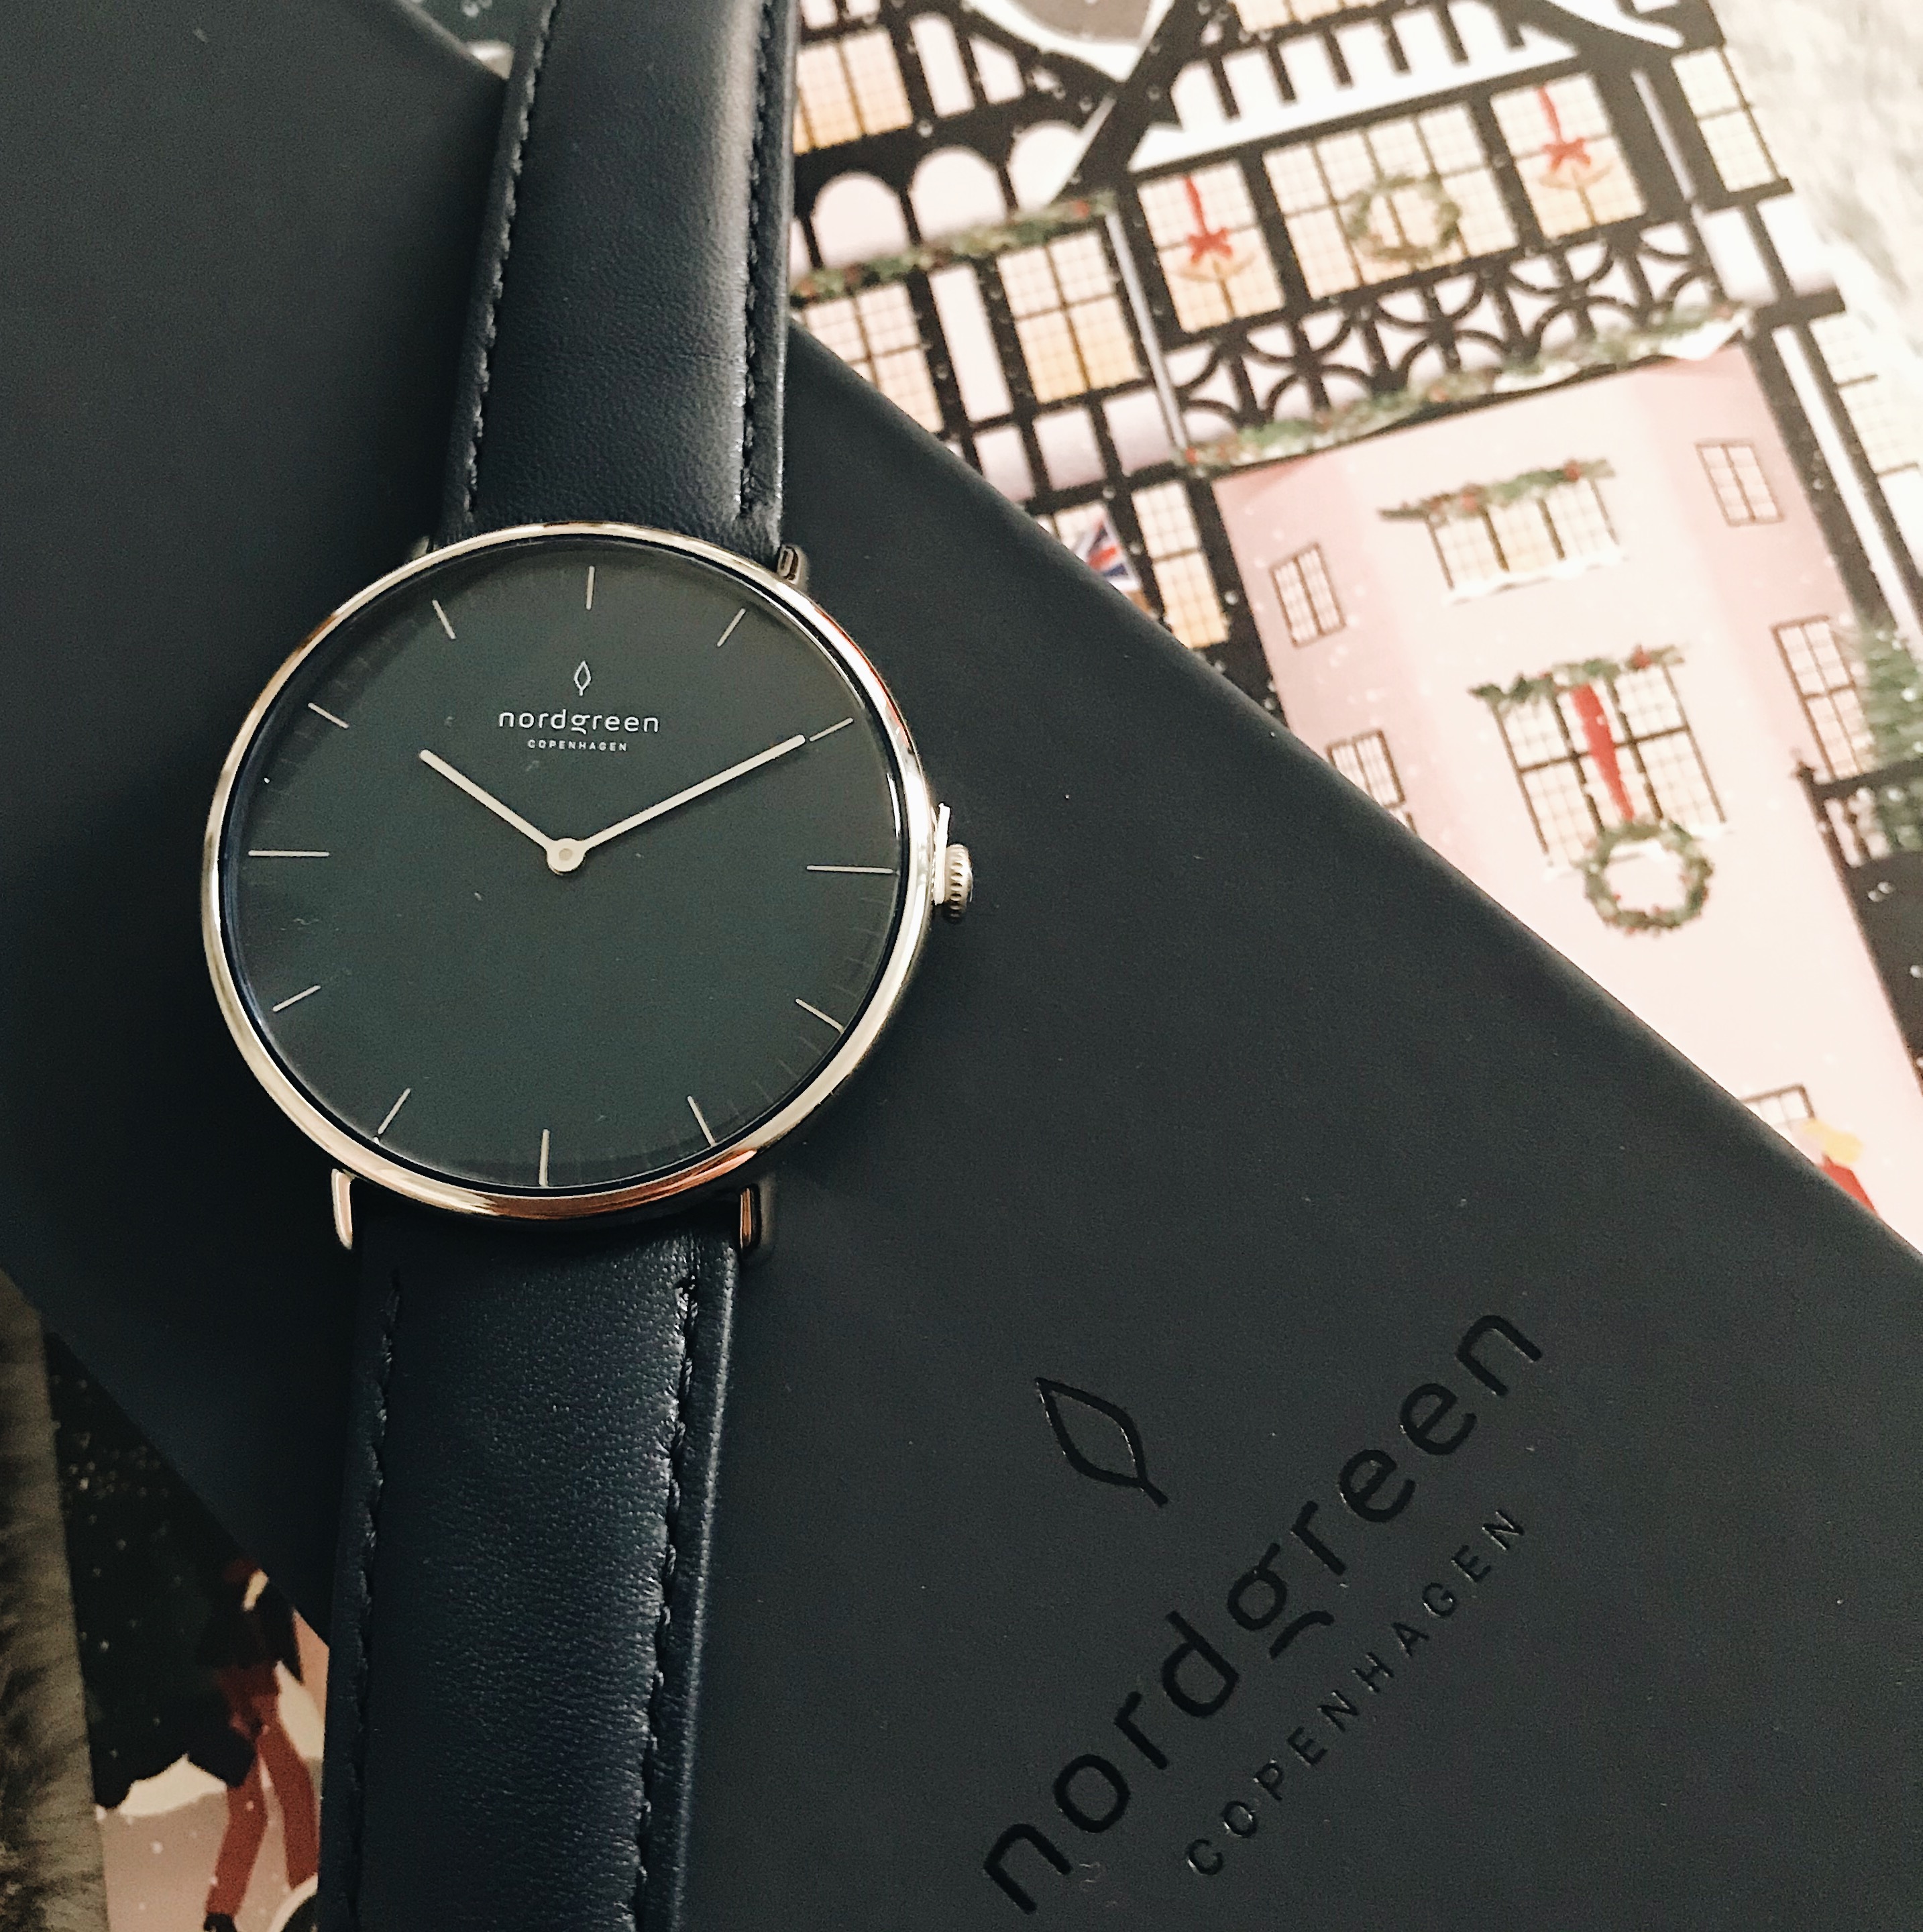 Nordgreen Native Watch Review